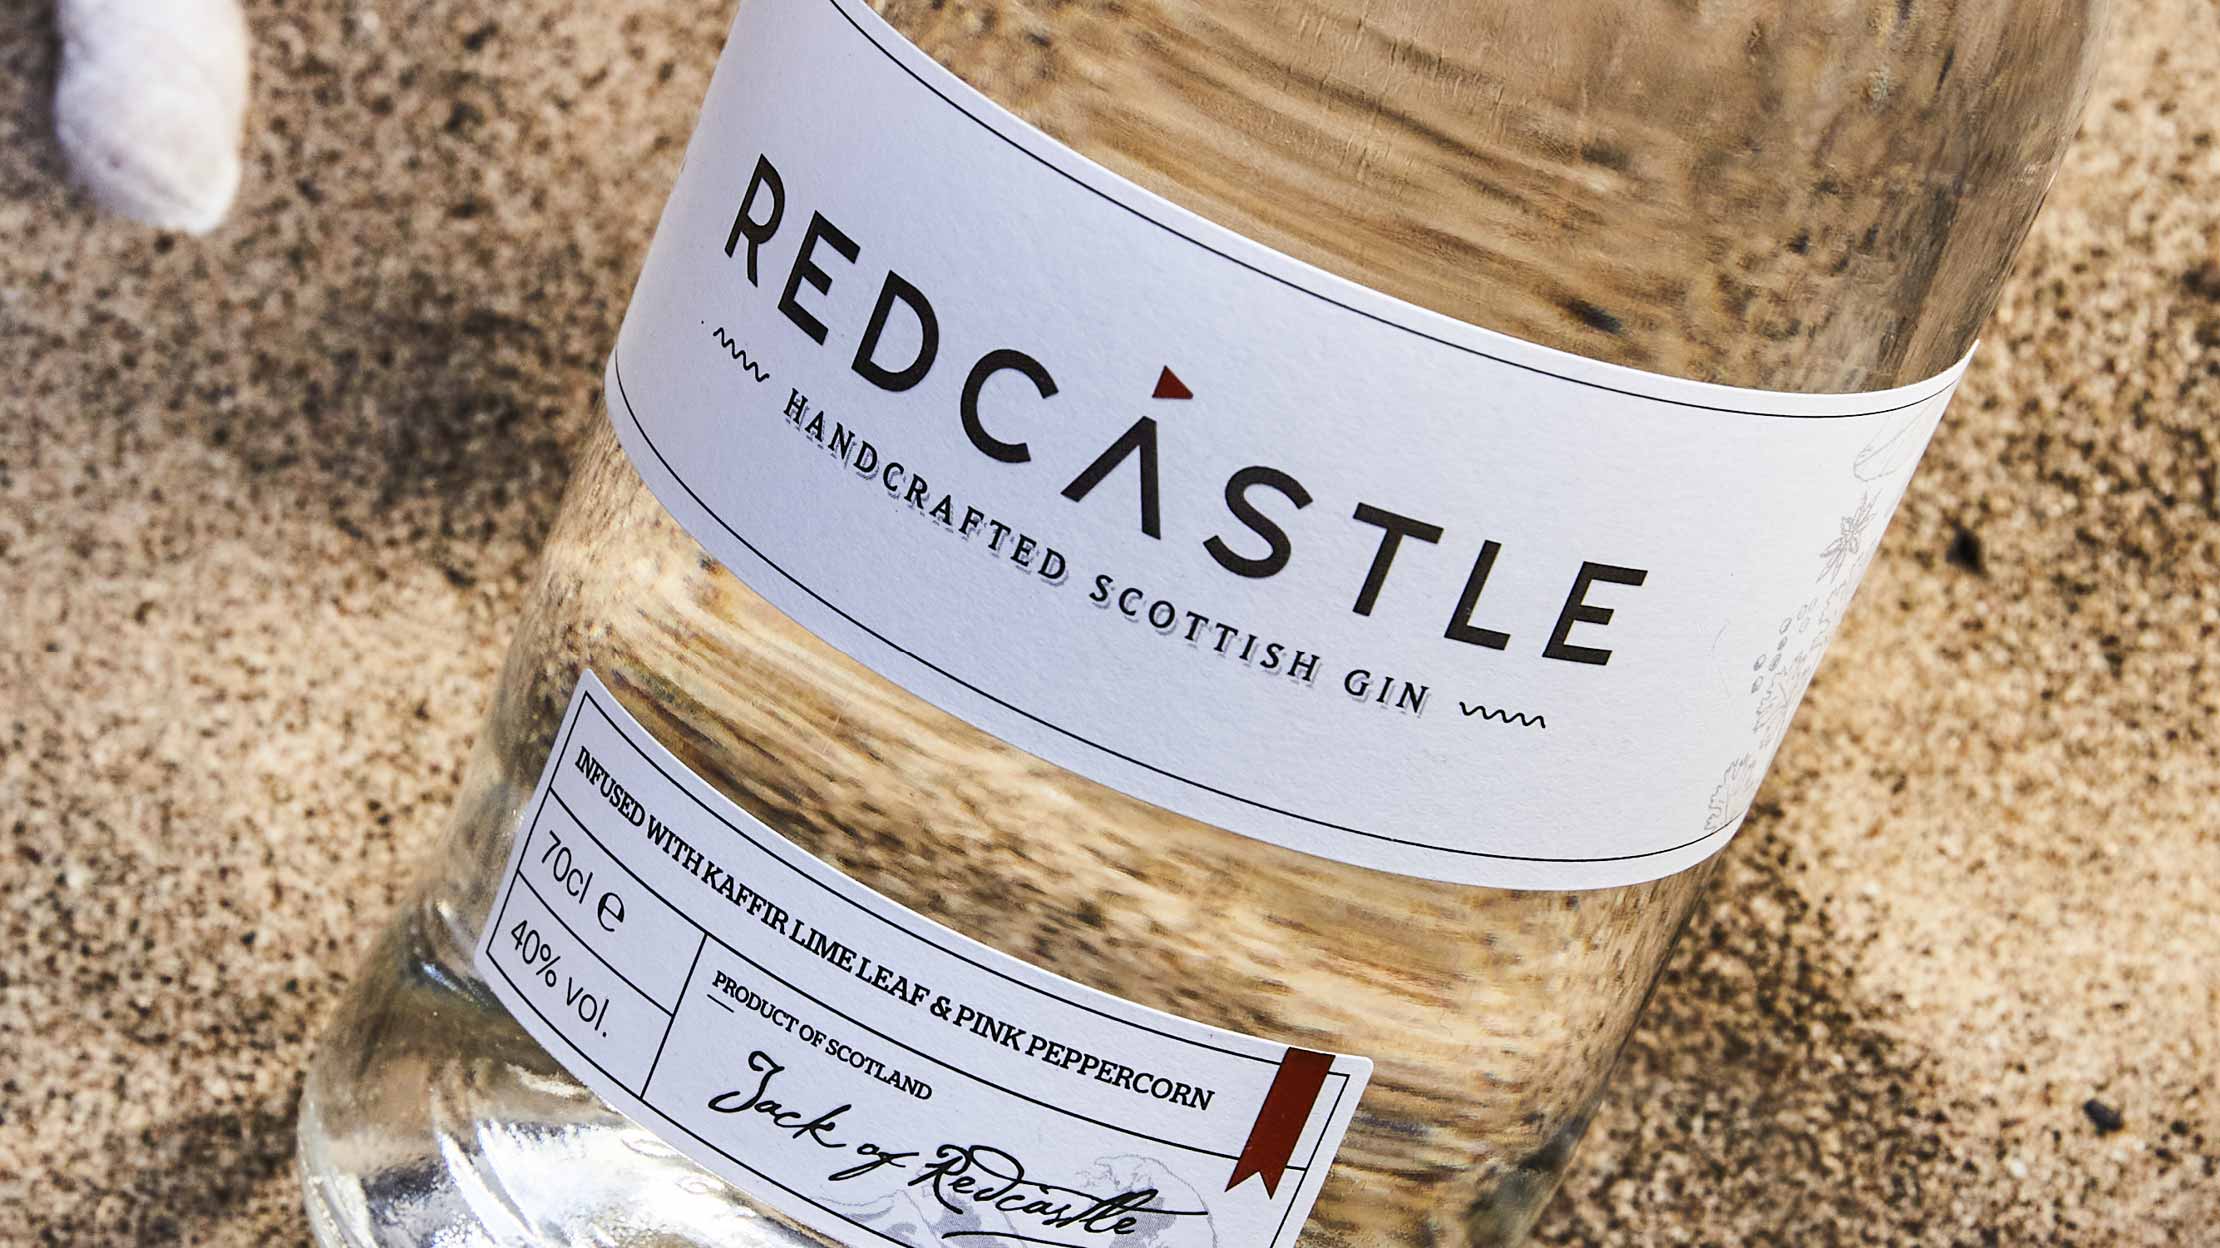 Cream-coloured label on the gin bottle caption "Redcastle".